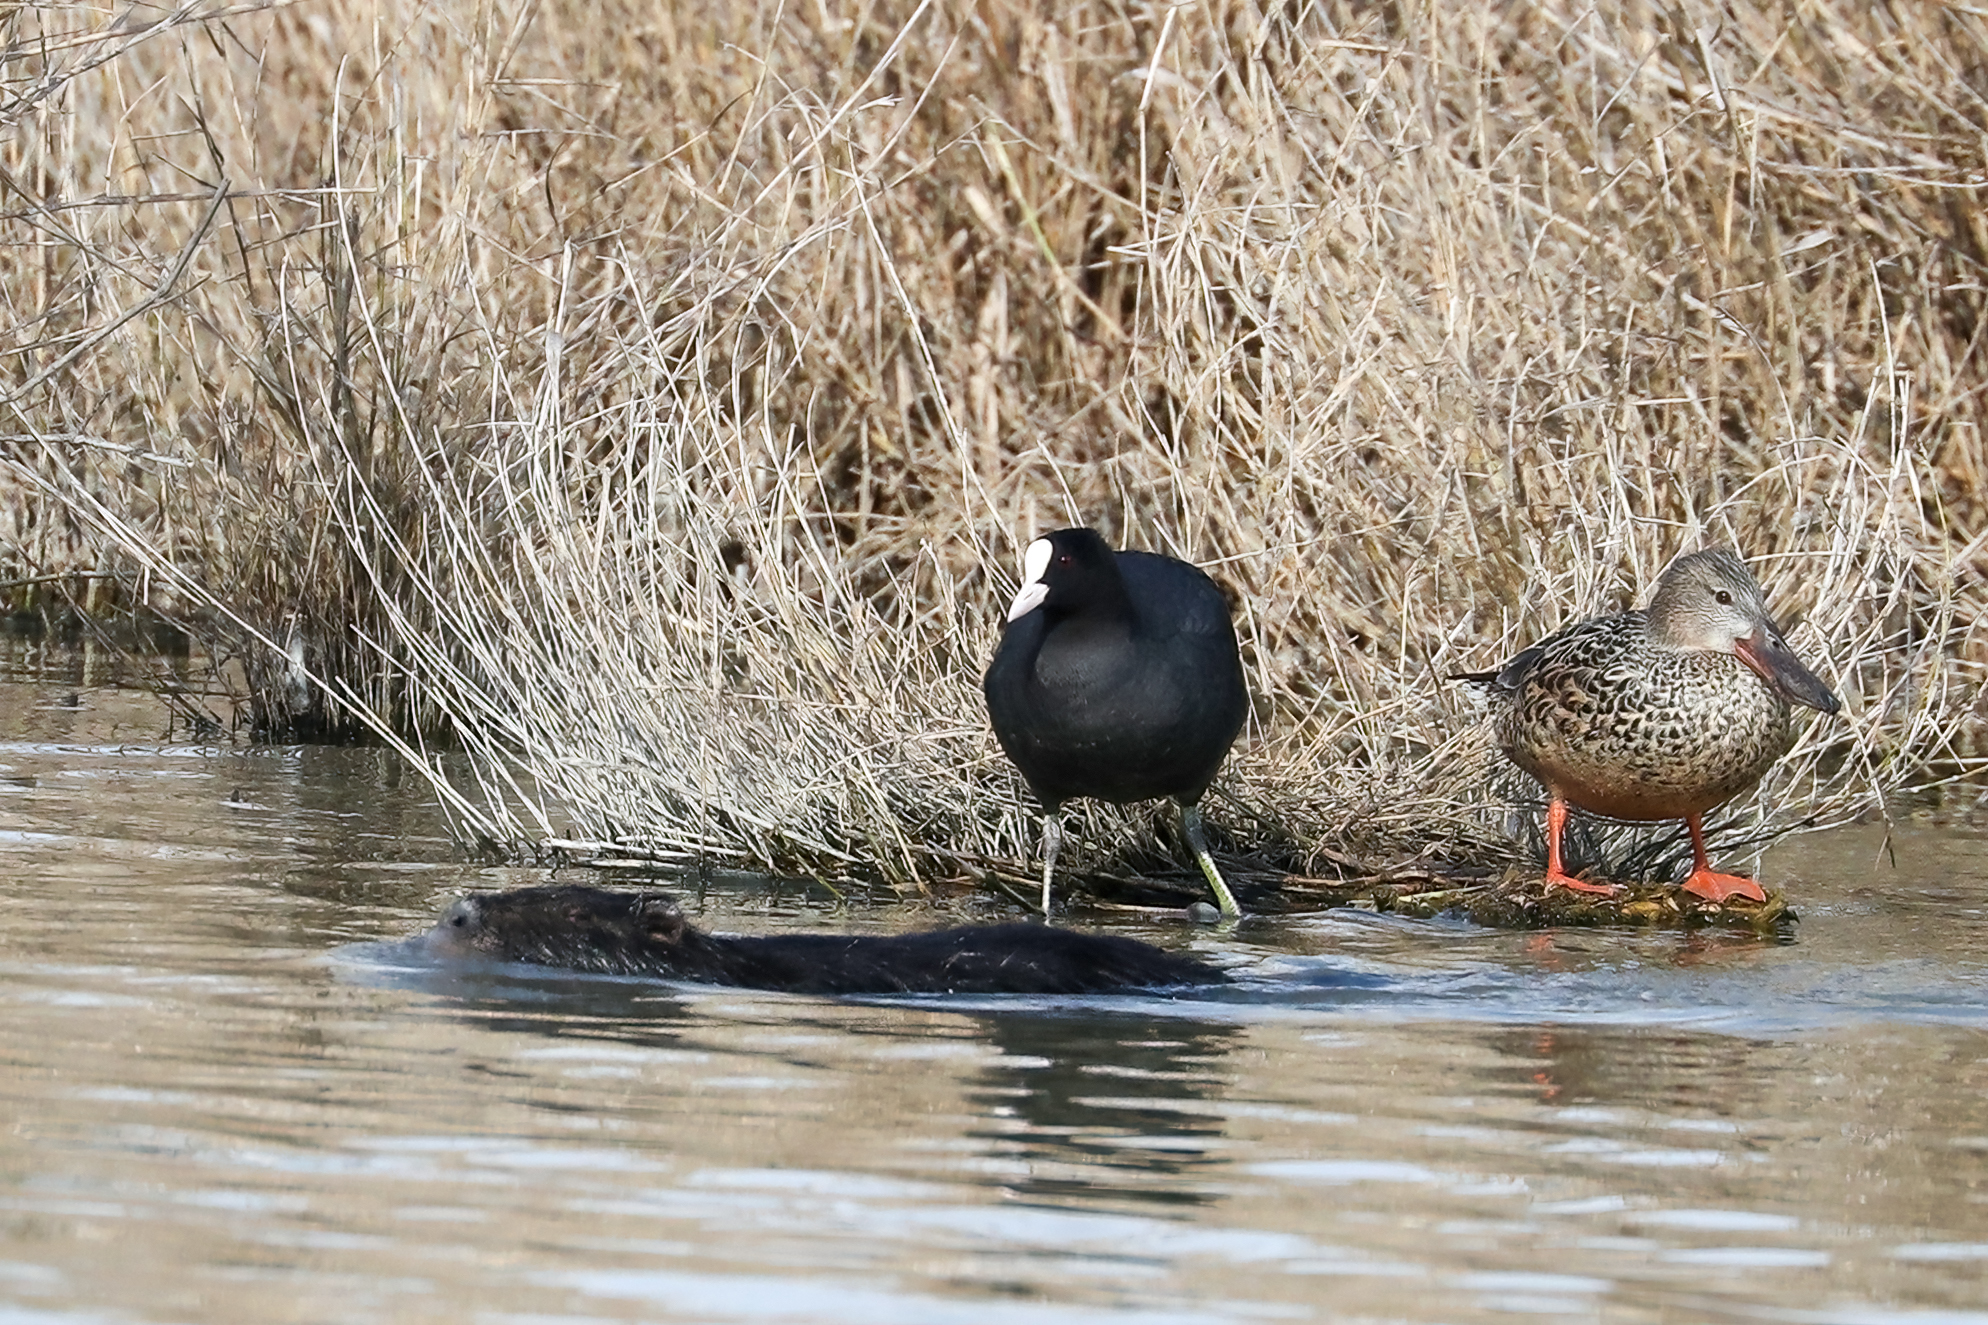 On the bank of the river .. Nutria coot shoveler ...